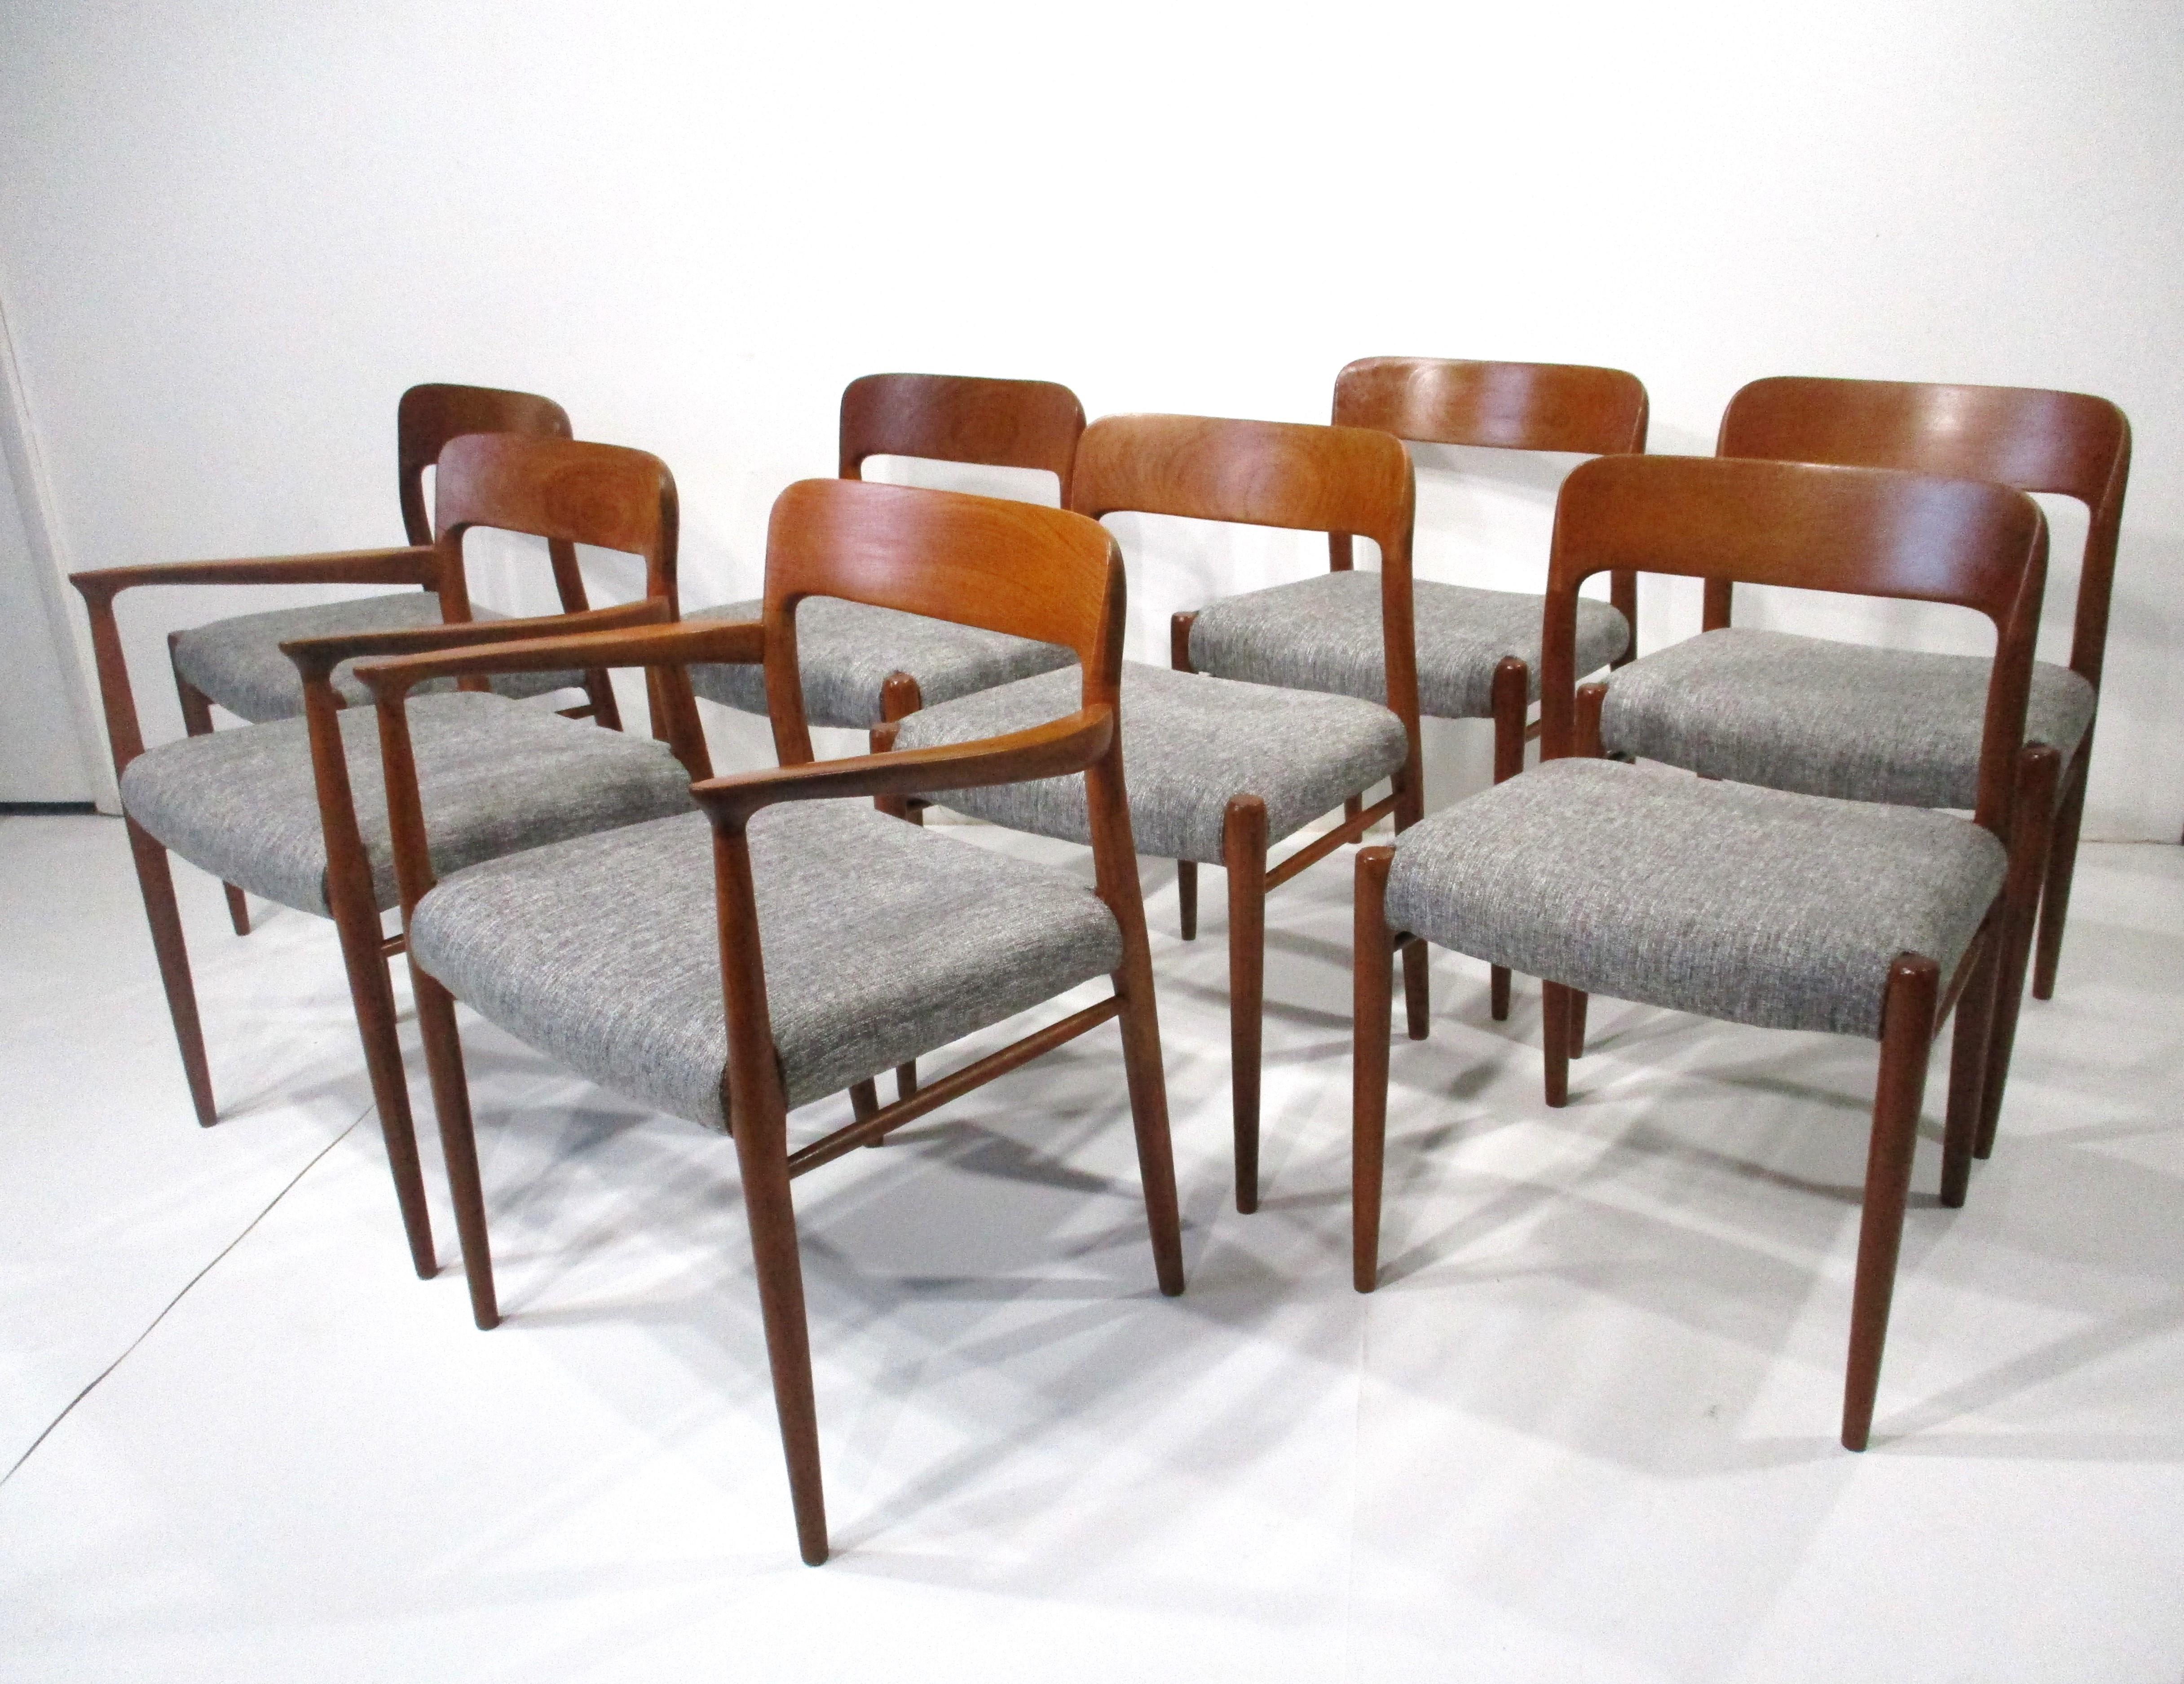 A set of eight sculptural solid teak dining chairs two with arms and six side chairs all with upholstered seats . The seat bottoms are upholstered in a salt  and peppered colored woven contract fabric produced for heavy usage and wear . Designed by